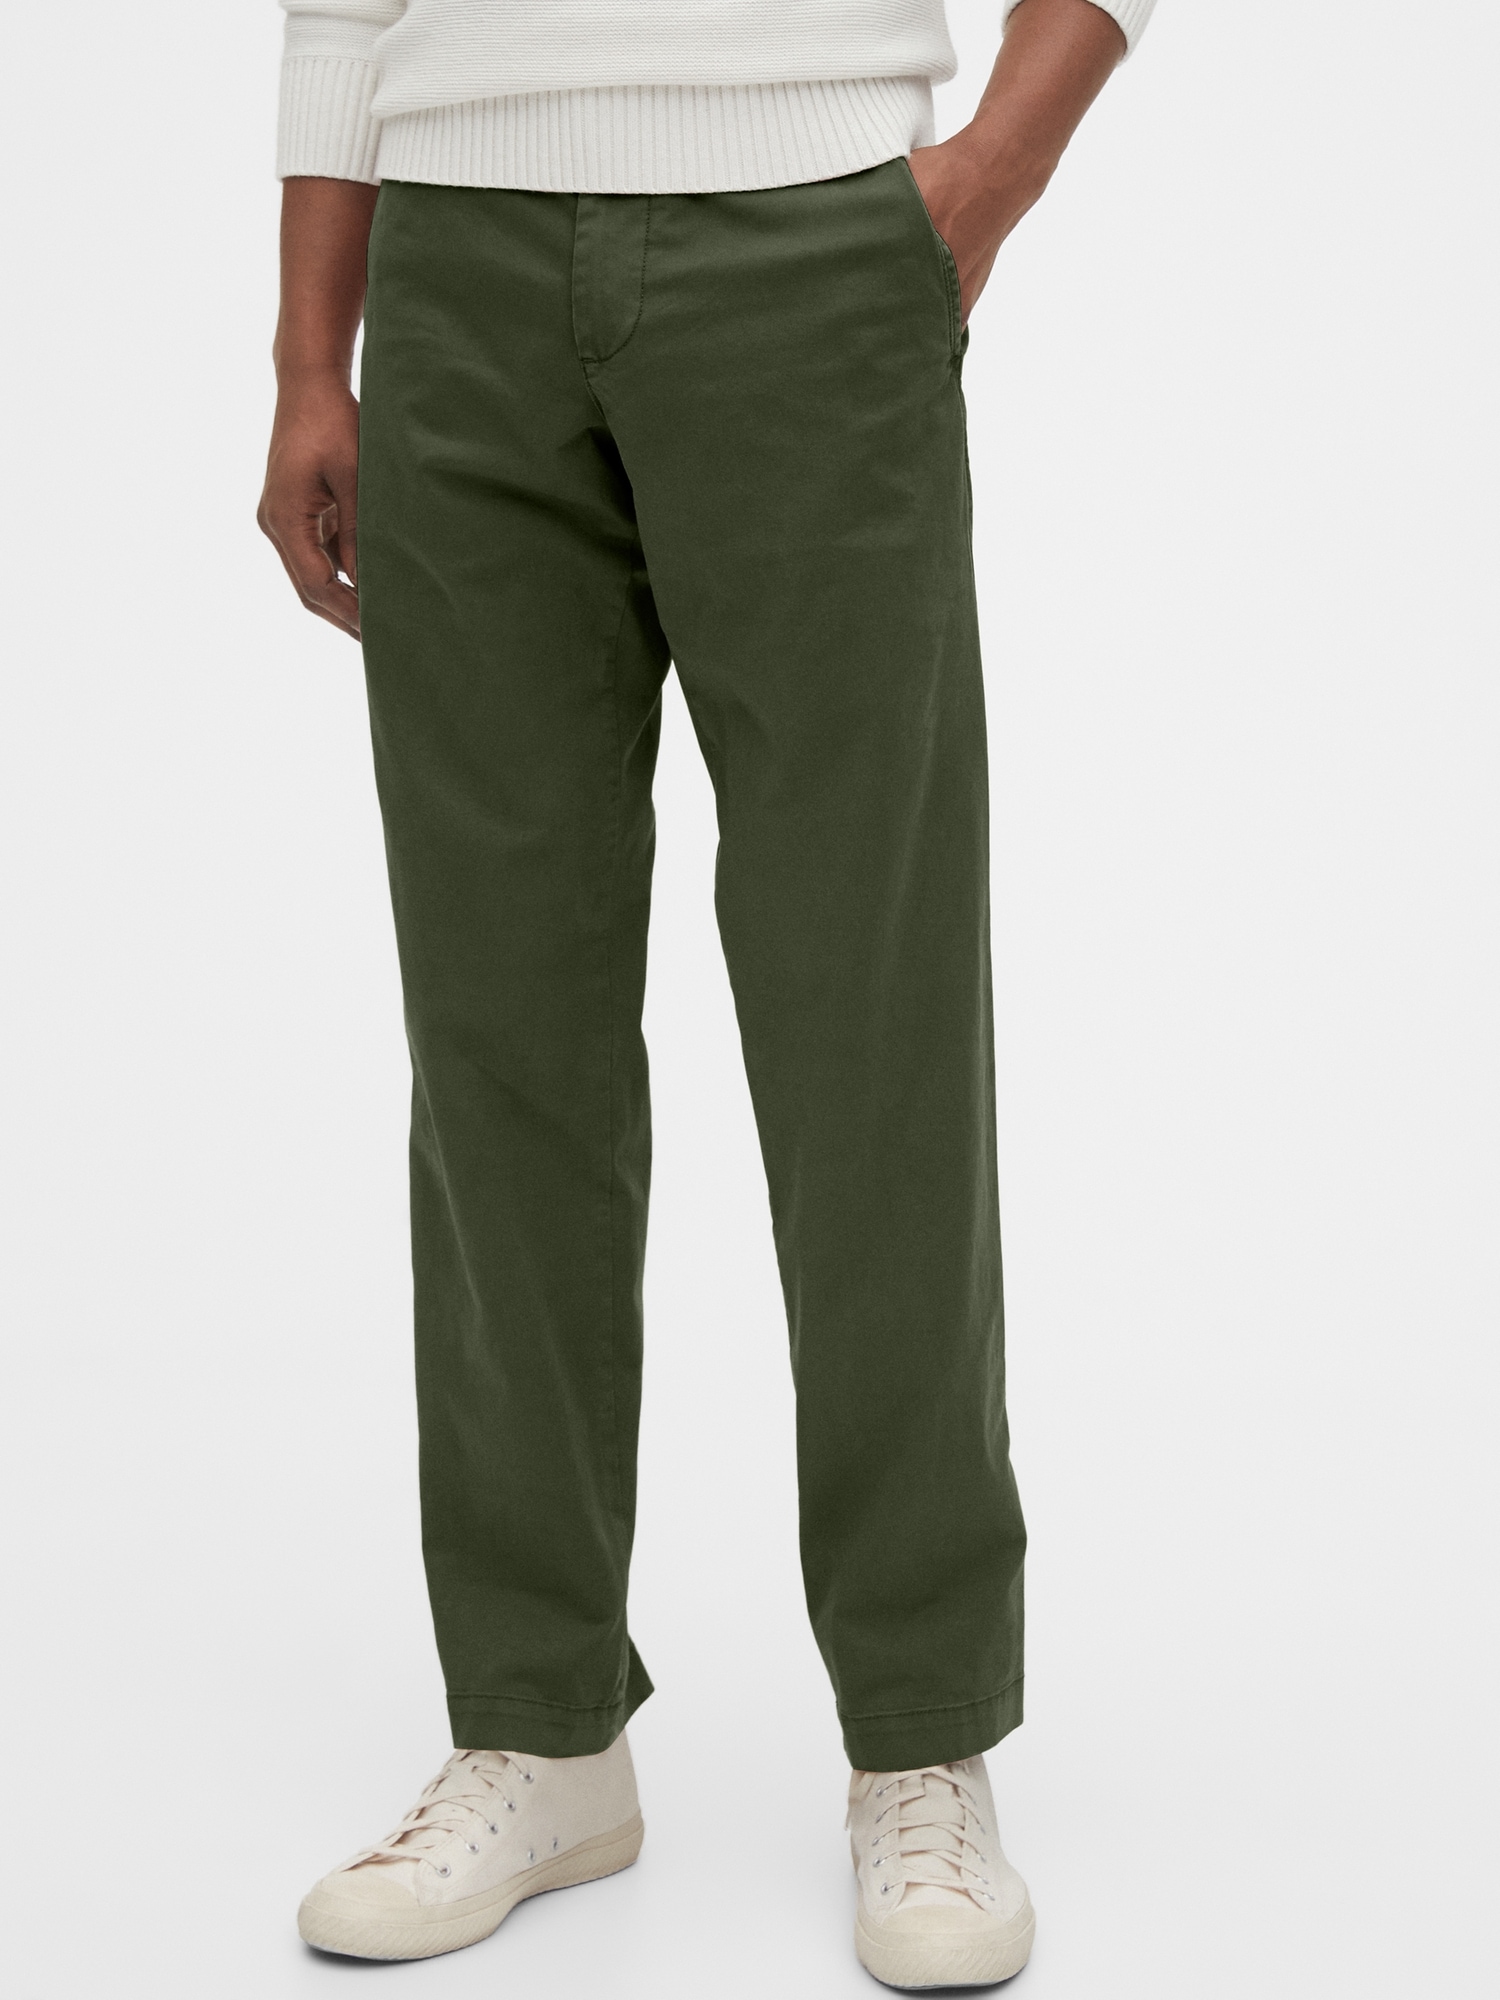 Vintage Khakis in Straight Fit with 